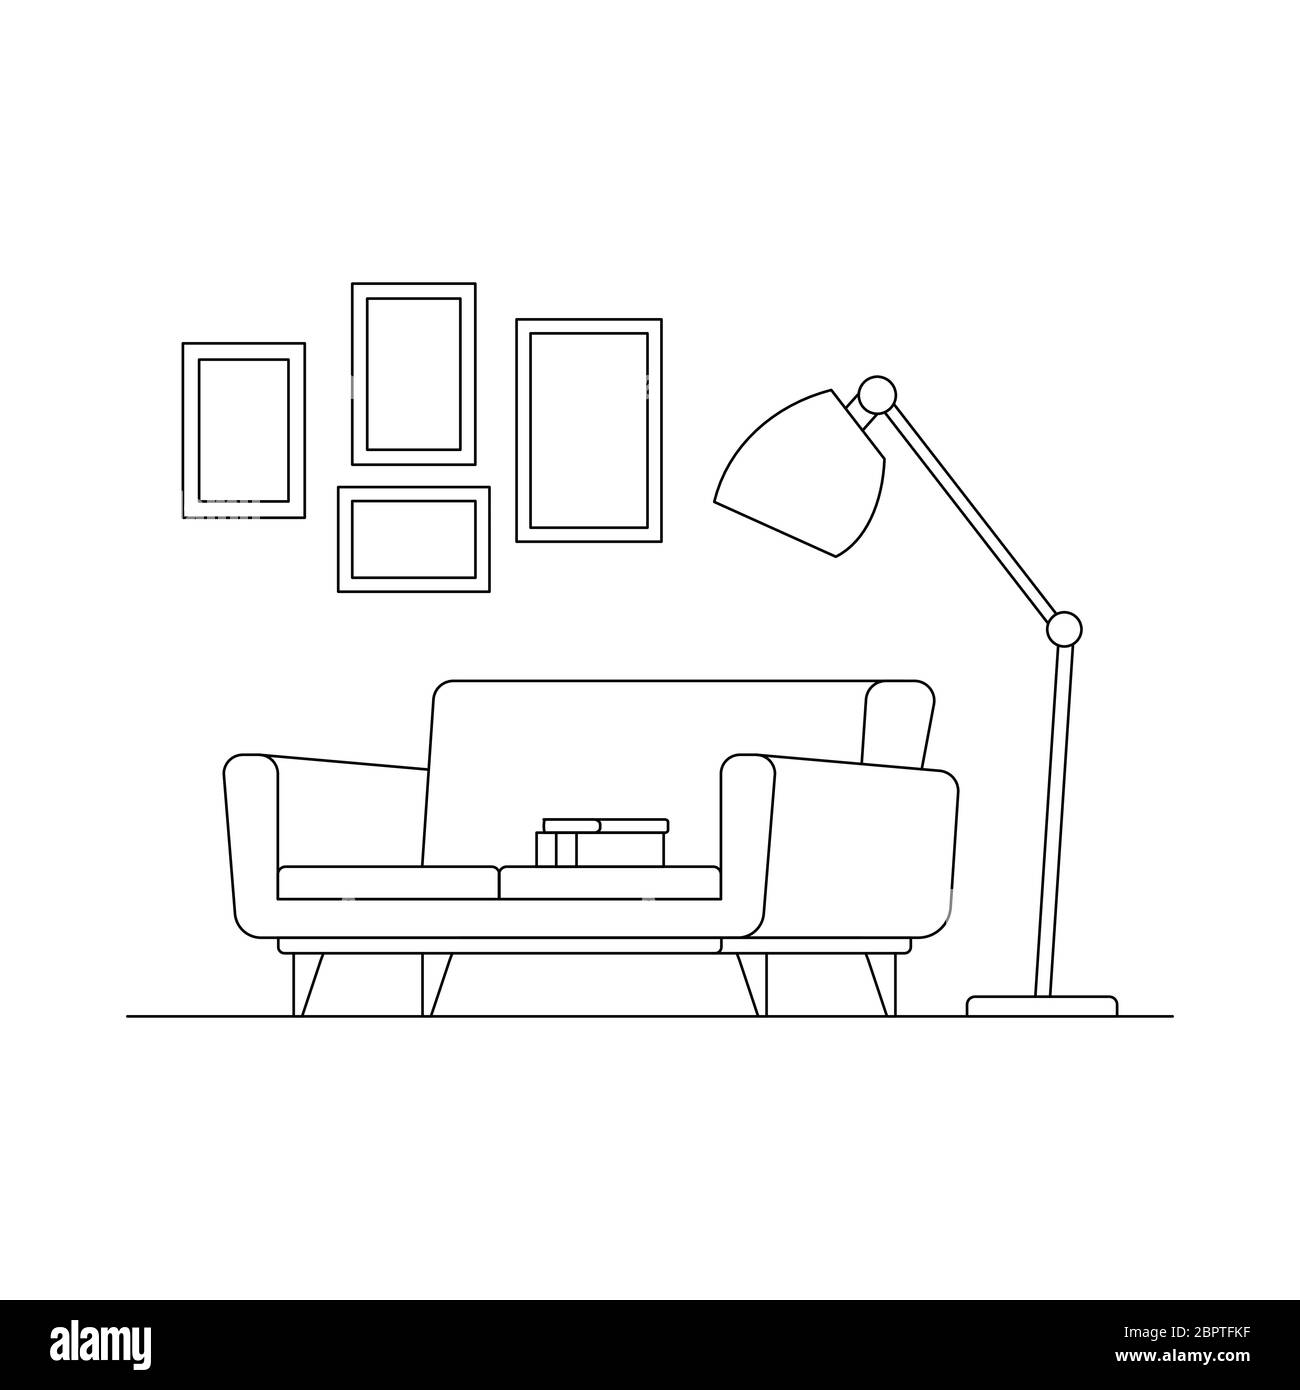 Cozy linear interior scene. Lamp, sofa, books, picture isolated on white background. Part of cozy home living room interior sketch background with fur Stock Vector